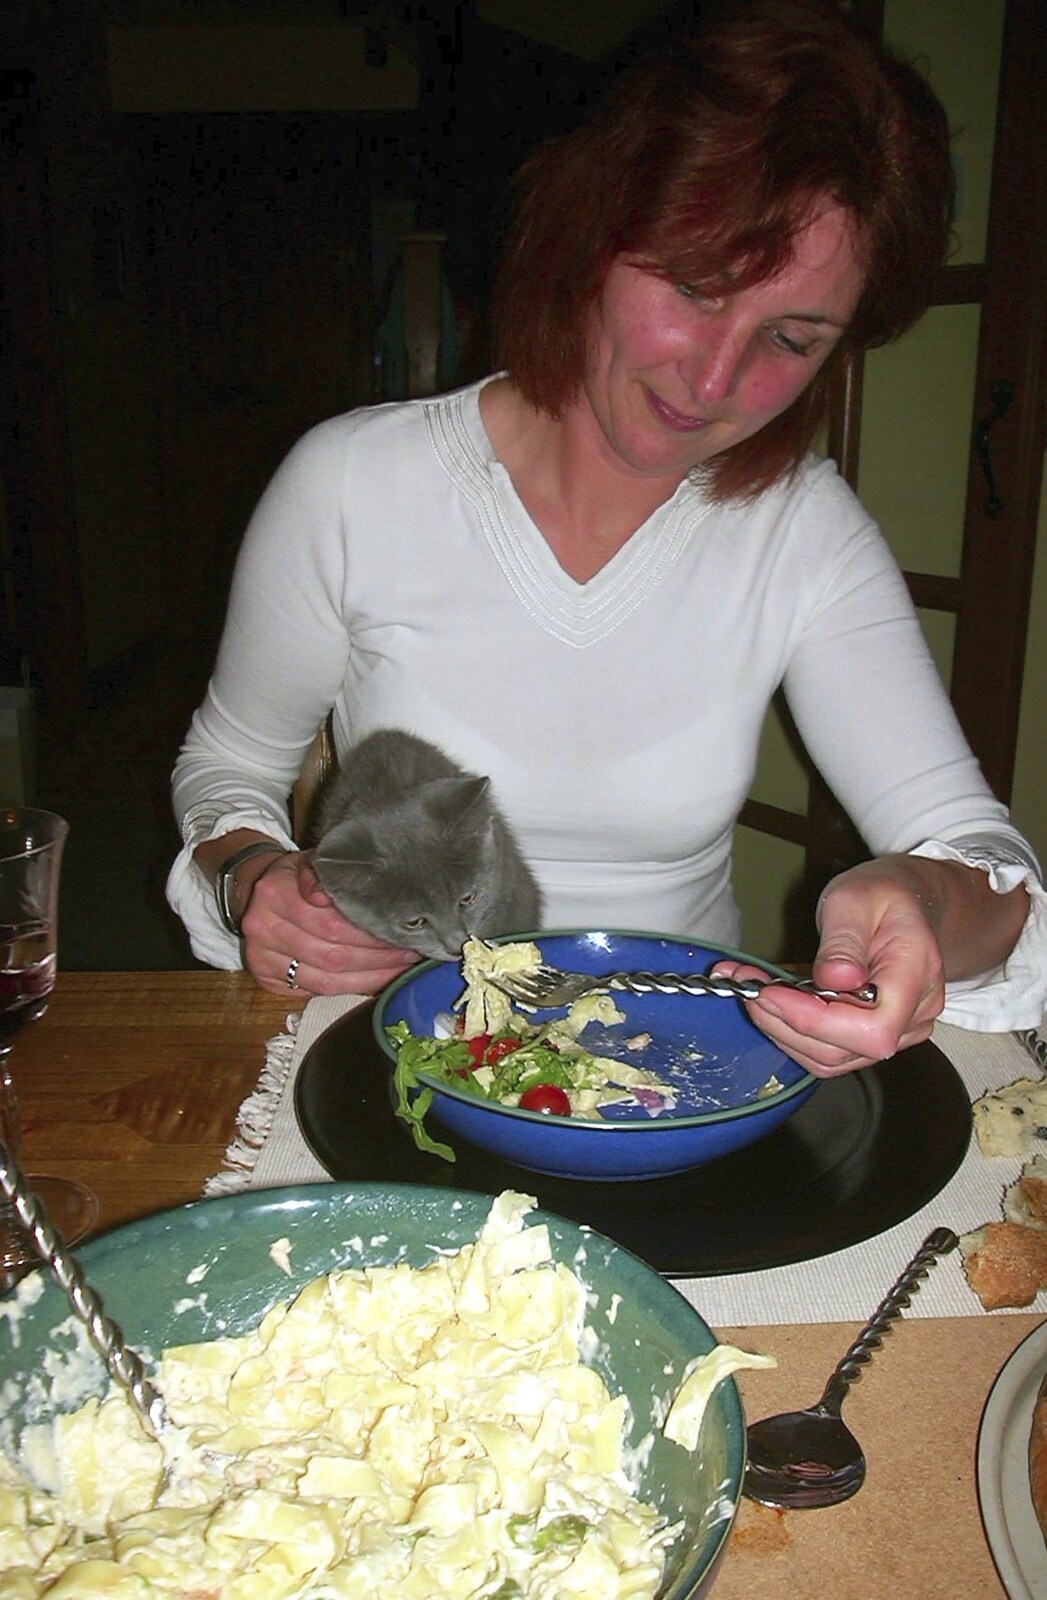 Slinky gets some salad from Dove House, and Dinner Round Anne's, Thornham and Eye, Suffolk - 11th April 2003